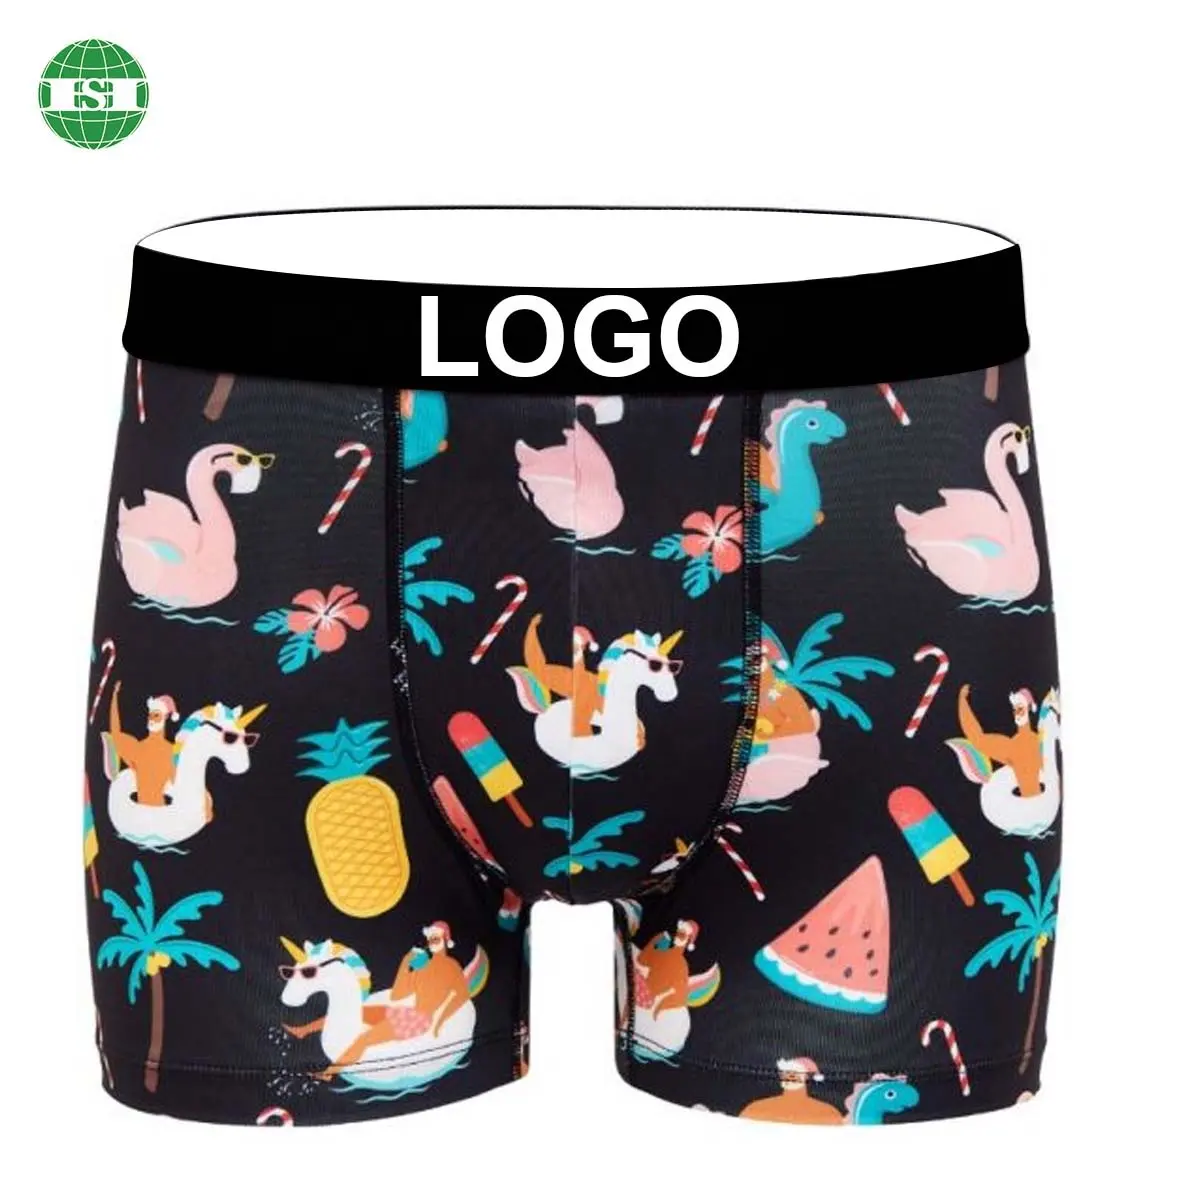 Polyester Spandex underwear customized graphic all over print trunks personalized with your logo on waistband